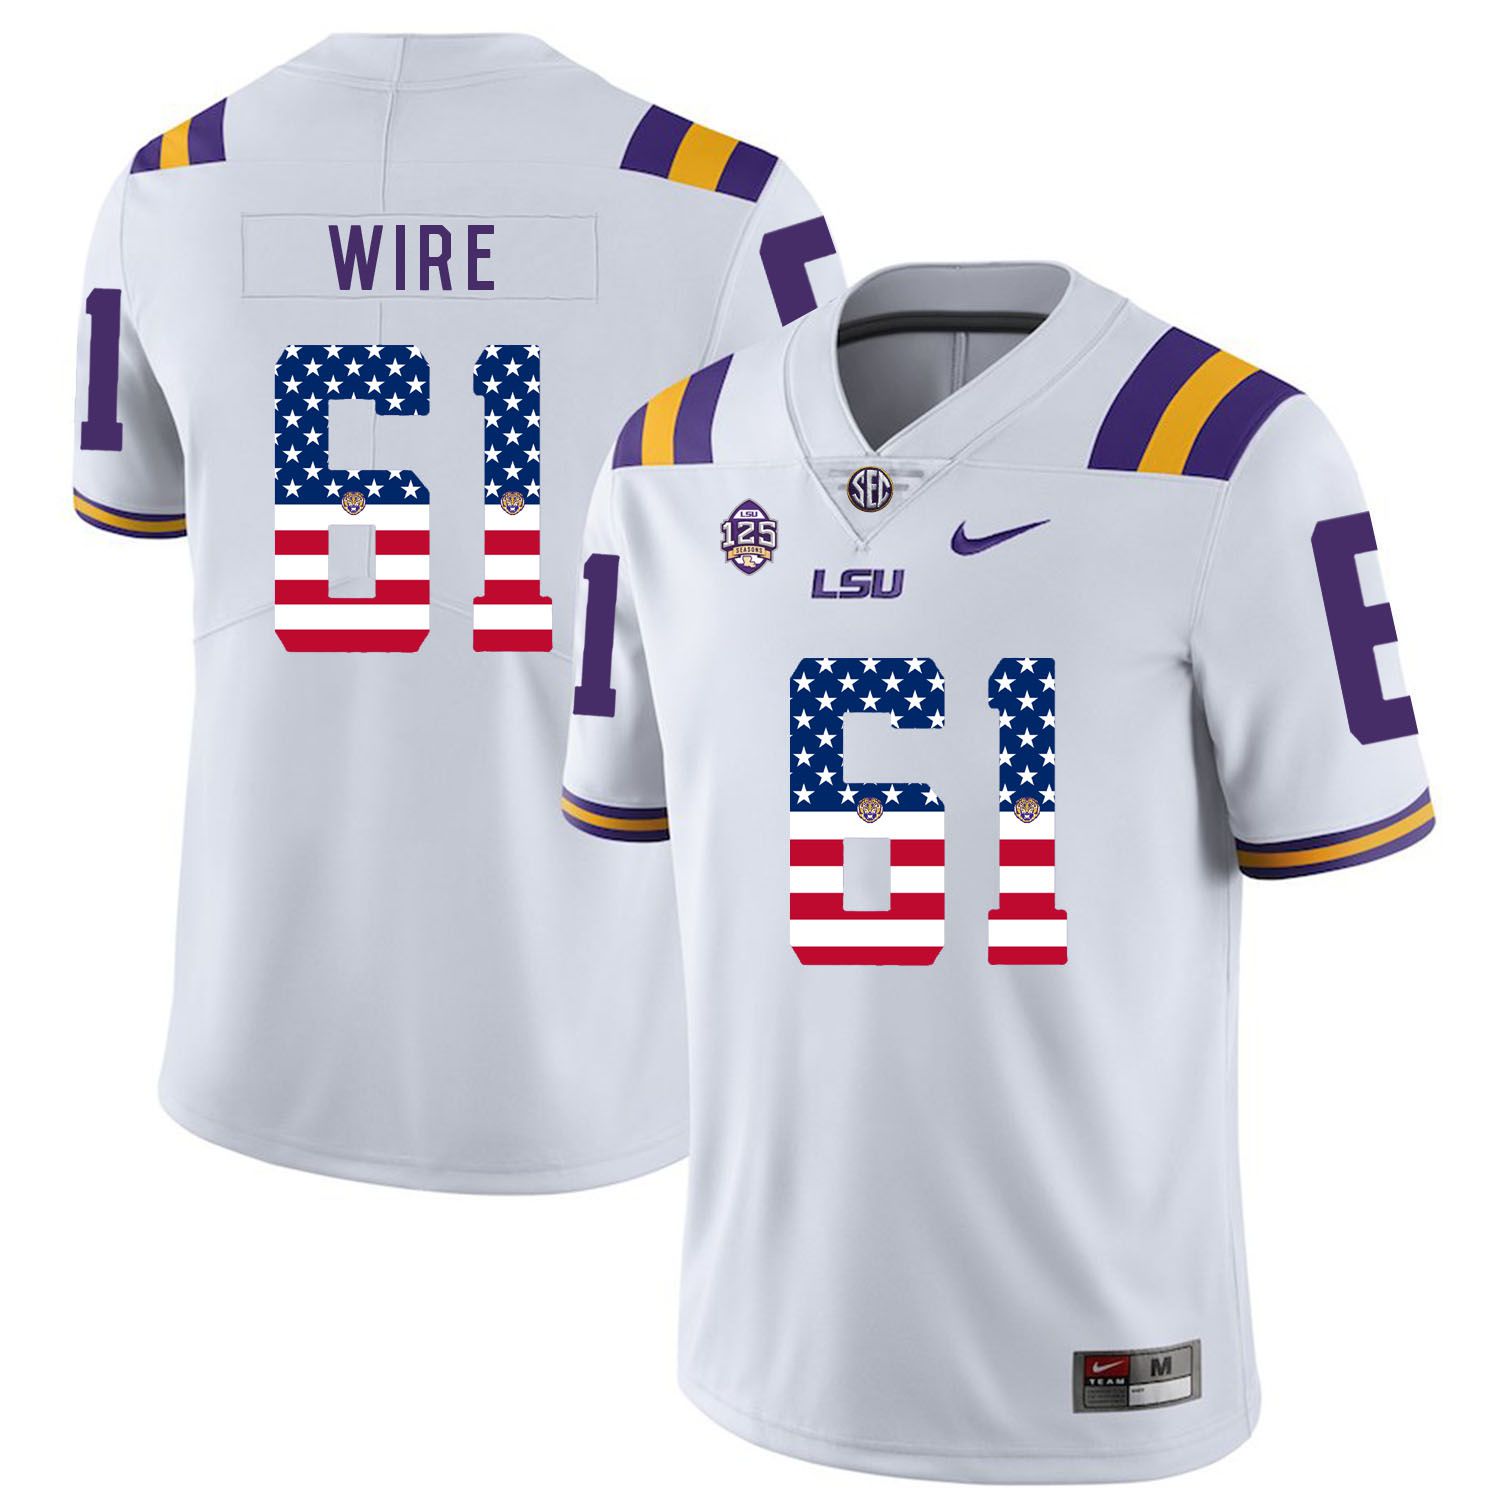 Men LSU Tigers #61 Wire White Flag Customized NCAA Jerseys->customized ncaa jersey->Custom Jersey